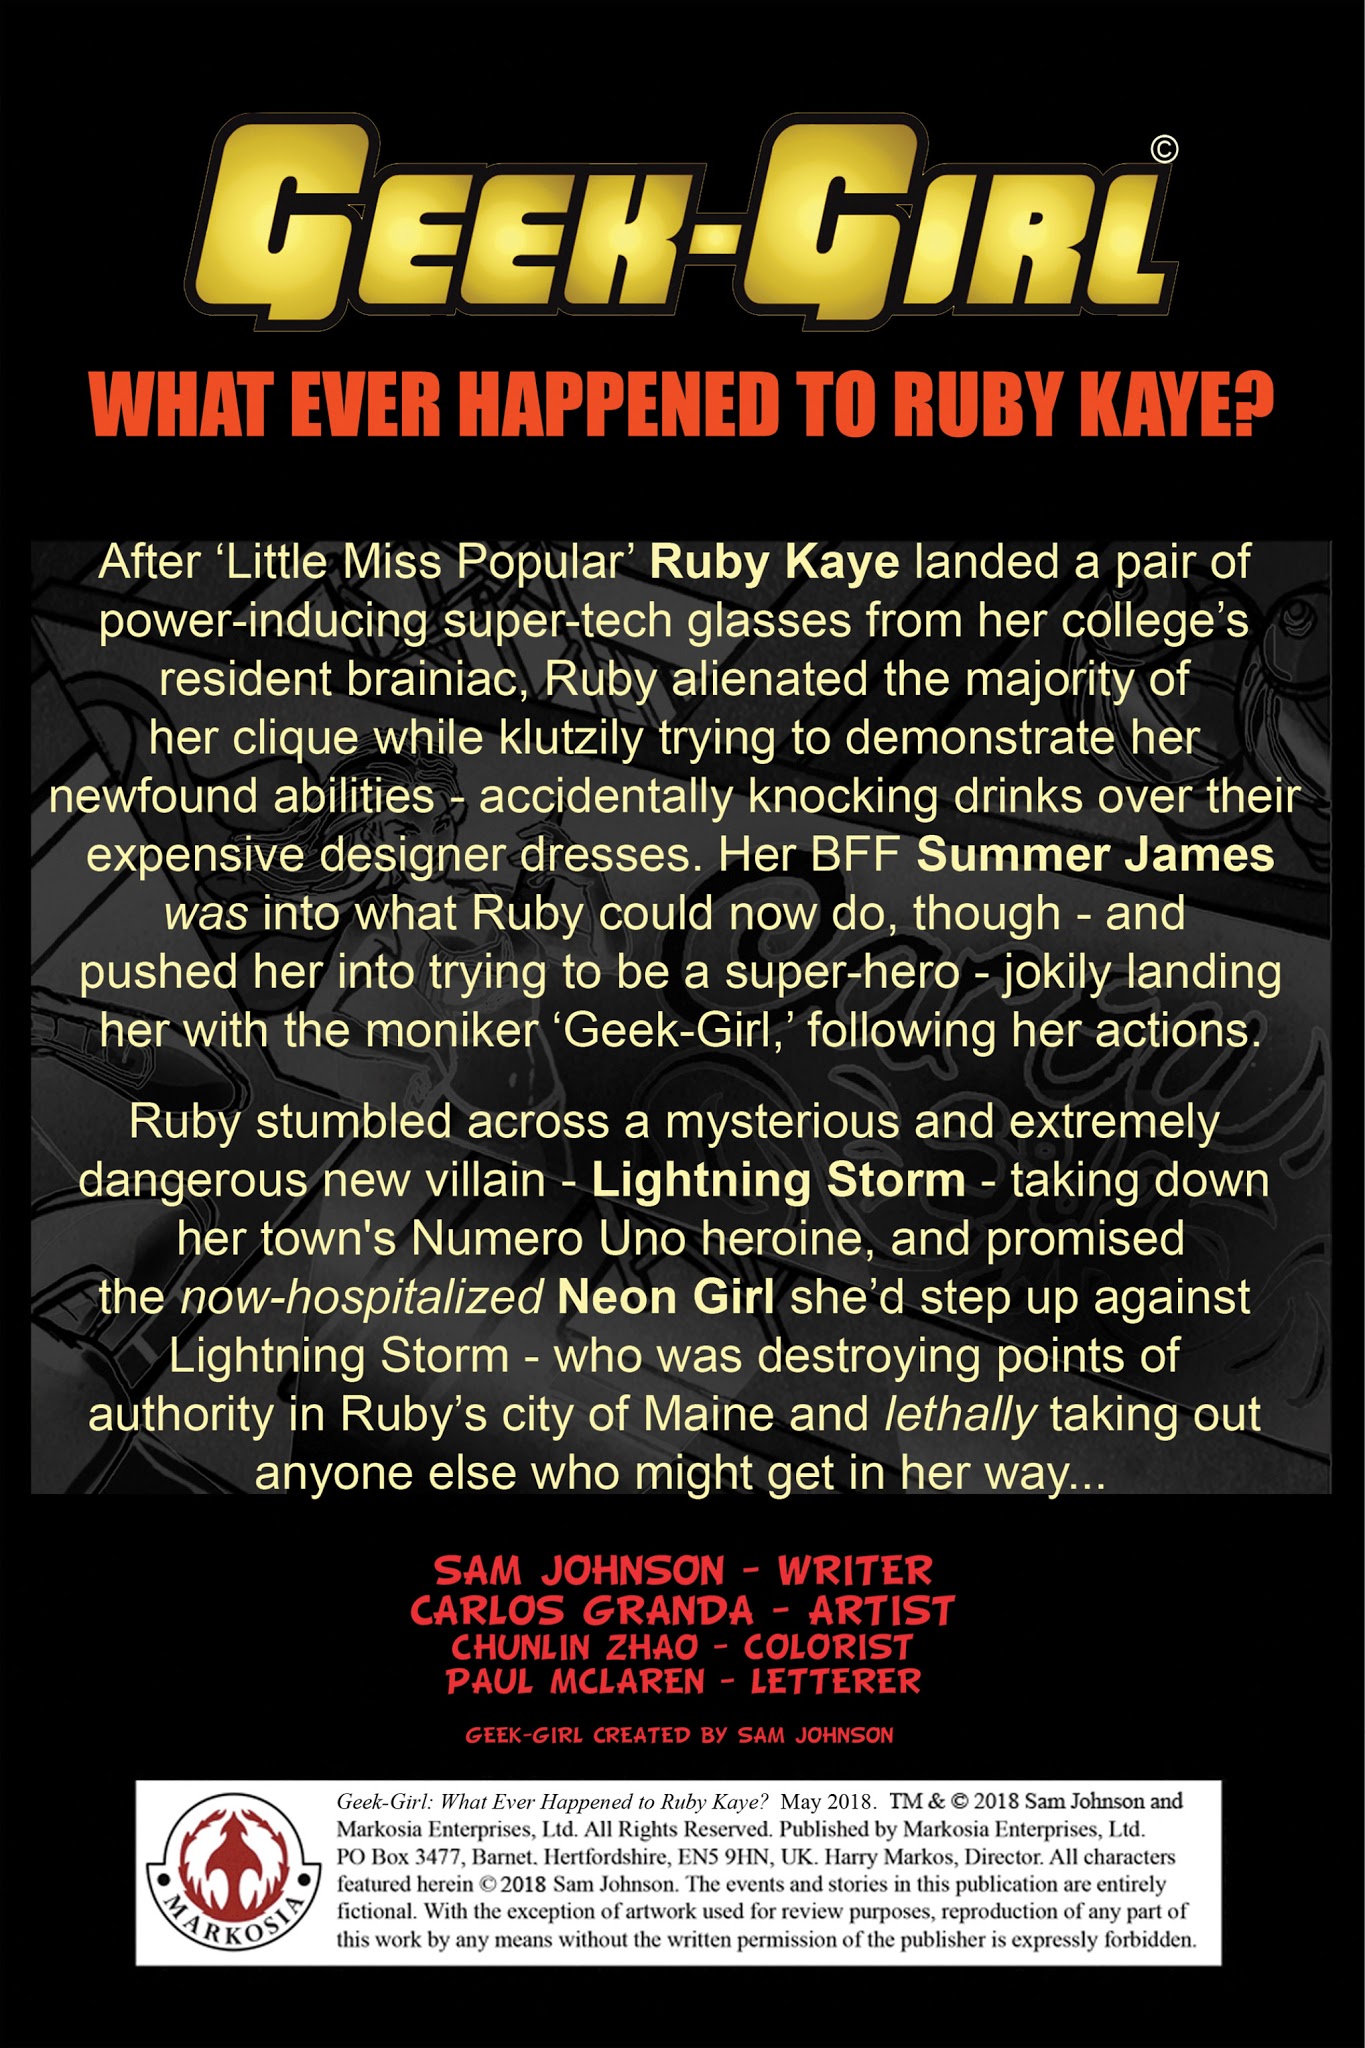 Read online Free Comic Book Day 2018 comic -  Issue # Geek-Girl - What Ever Happened to Ruby Kaye - 2